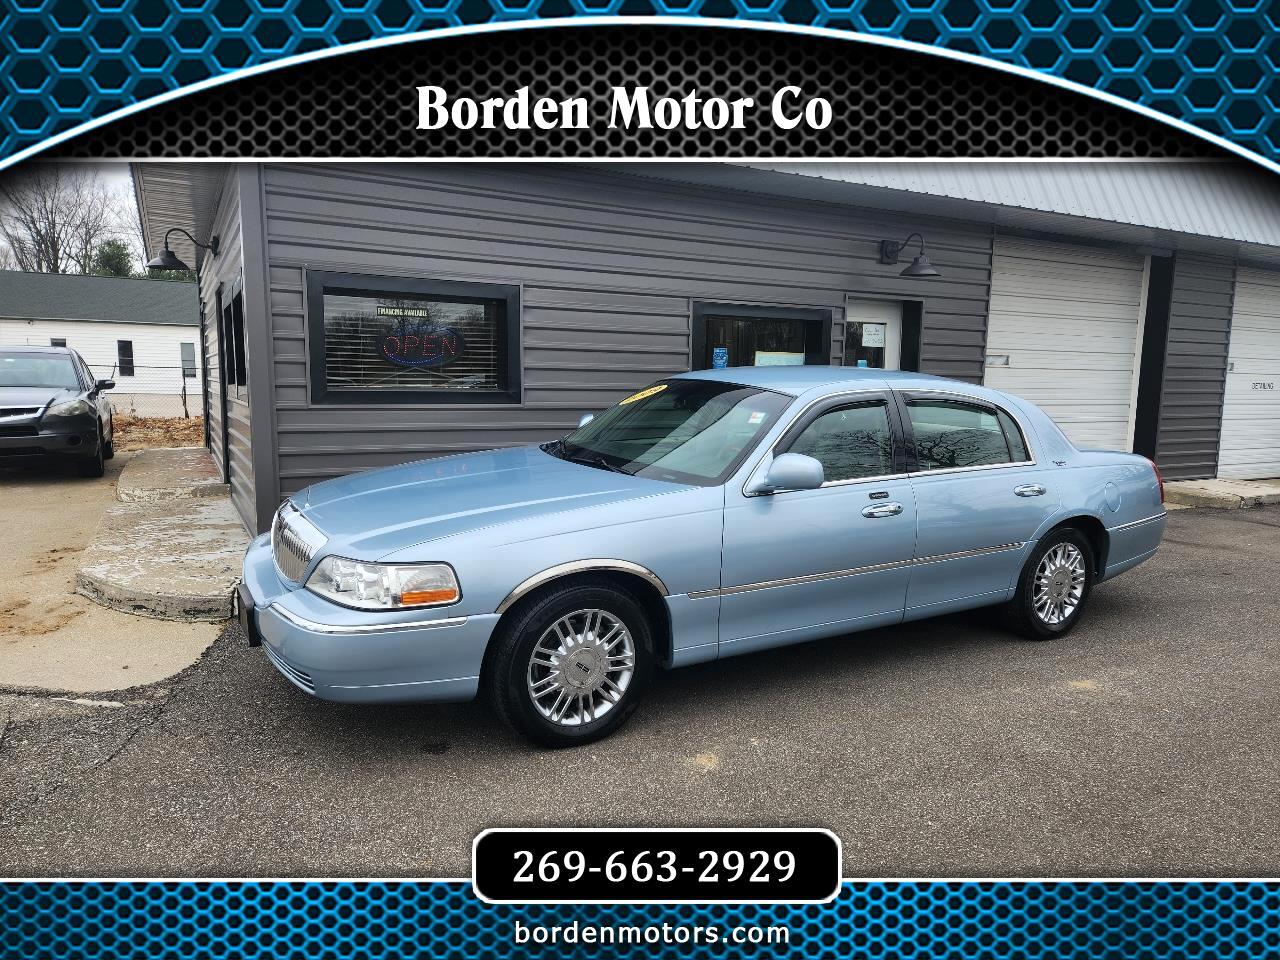 Used 2009 Lincoln Town Car 4dr Sdn Signature Limited for Sale in  Edwardsburg MI 49112 Borden Motor Co